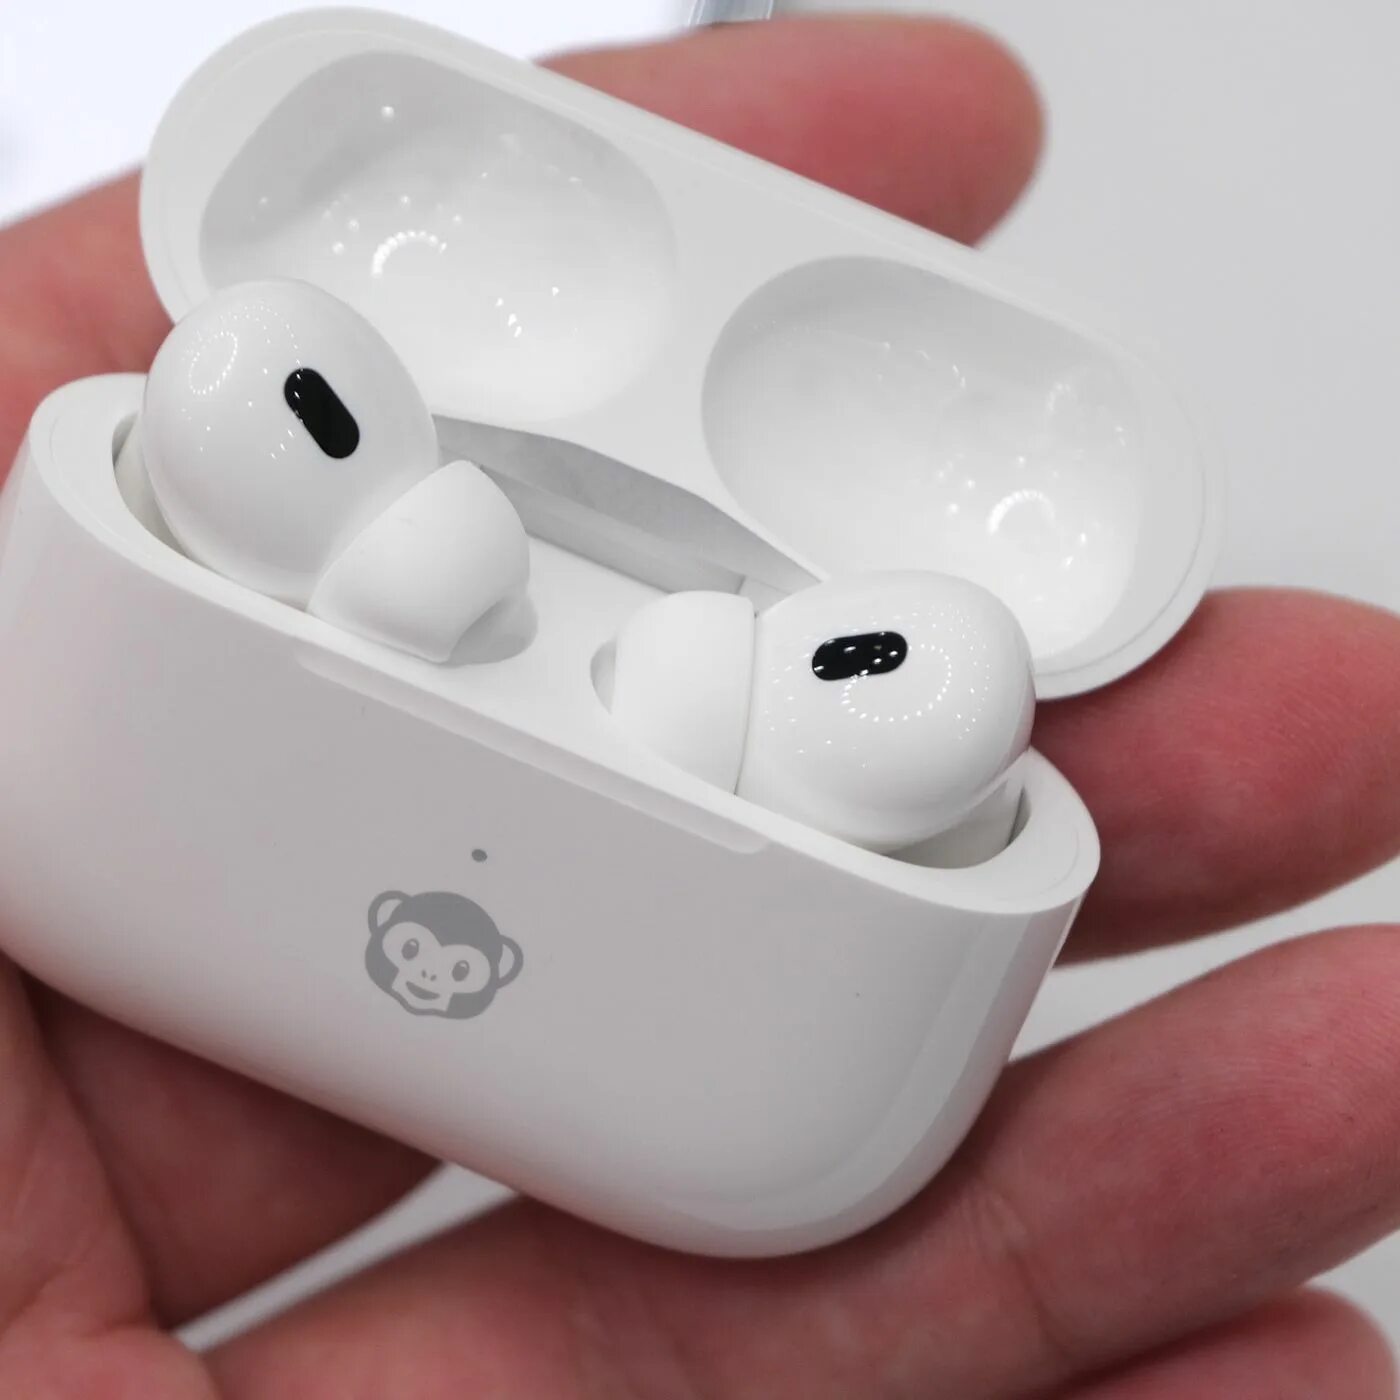 Замена airpods pro. Apple AIRPODS Pro 2. AIRPODS Pro 2022. Apple AIRPODS Pro 2 Generation. Apple AIRPODS Pro 2 2022.